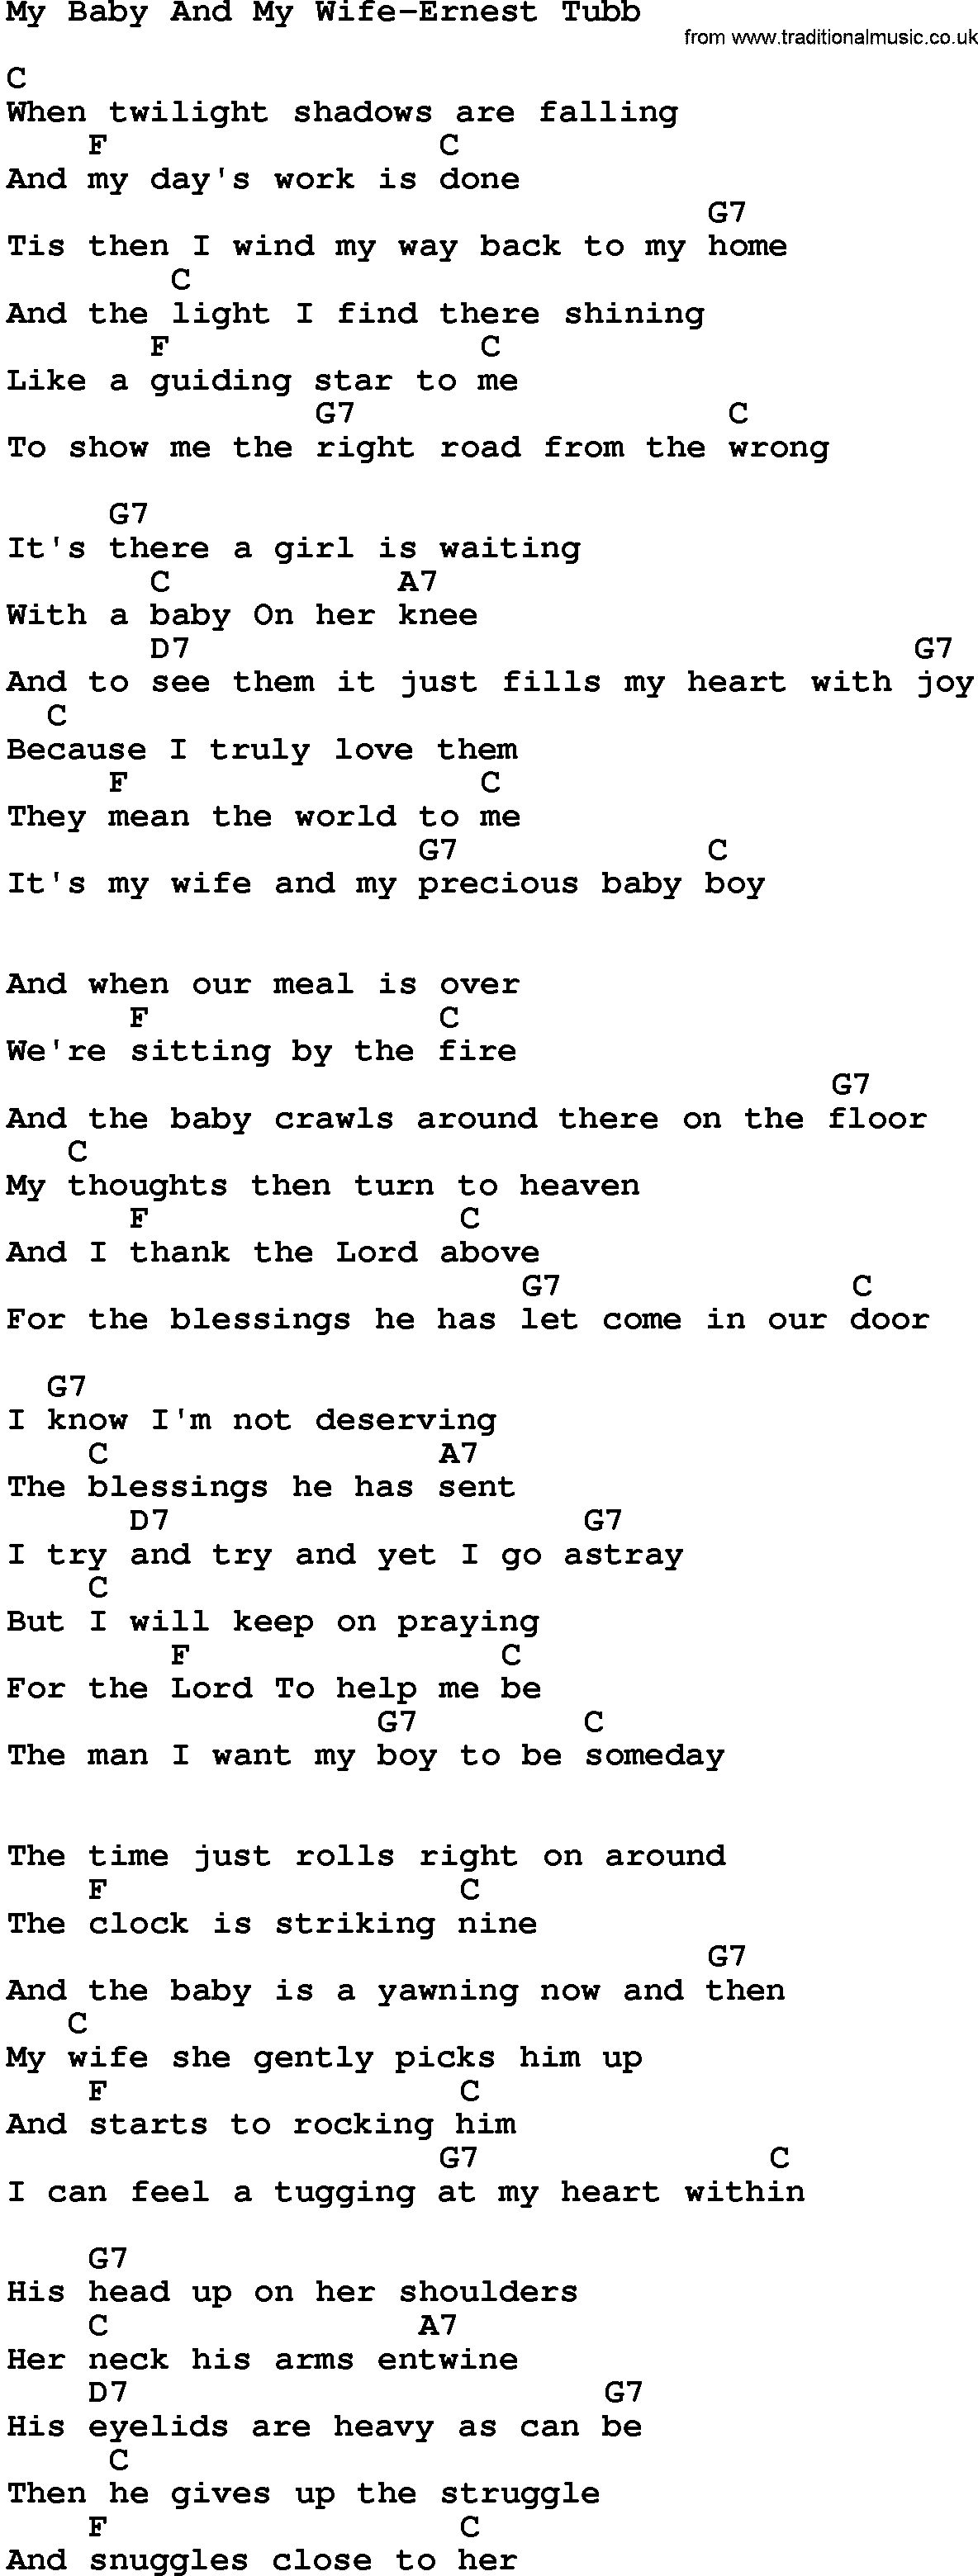 Country music song: My Baby And My Wife-Ernest Tubb lyrics and chords